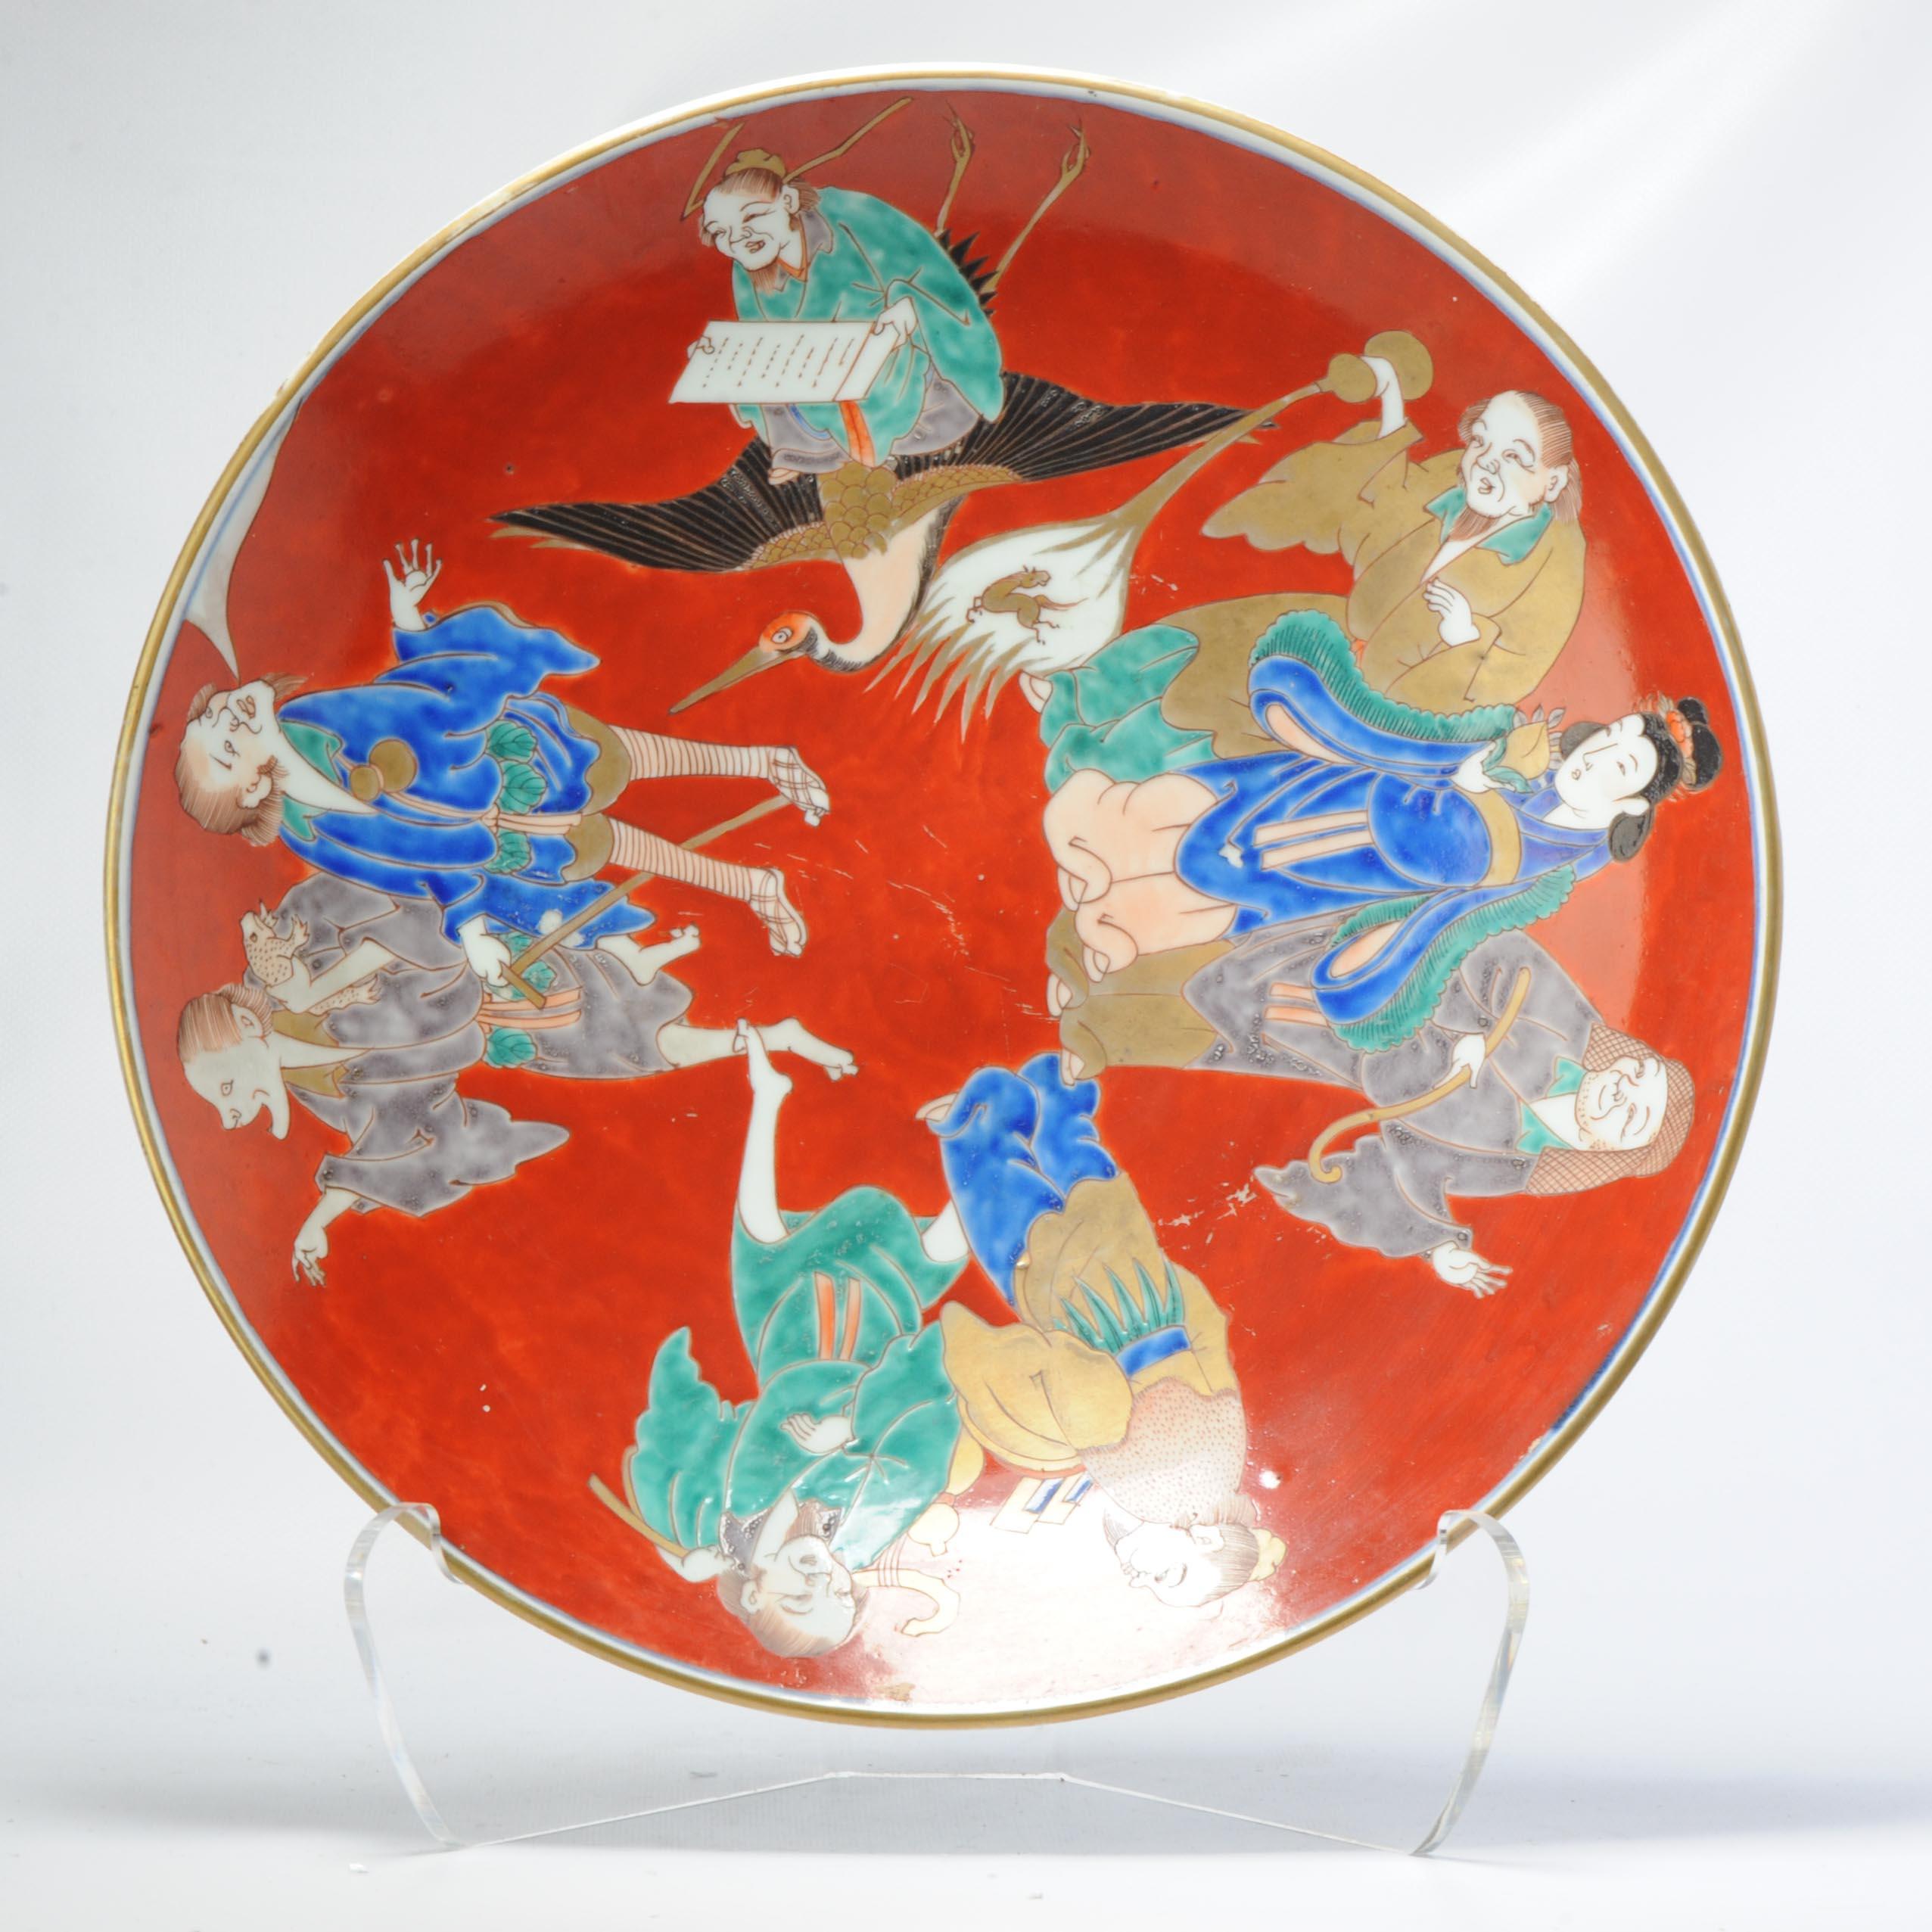 Very lovely piece with a nicely painted scene of the eight immortals on a red ground color. The back decorated with flower scrolls


Condition
Perfect. Size 400x75mm DiameterxHeight
Period
19th century Edo Period (1603–1867)
Meiji Periode